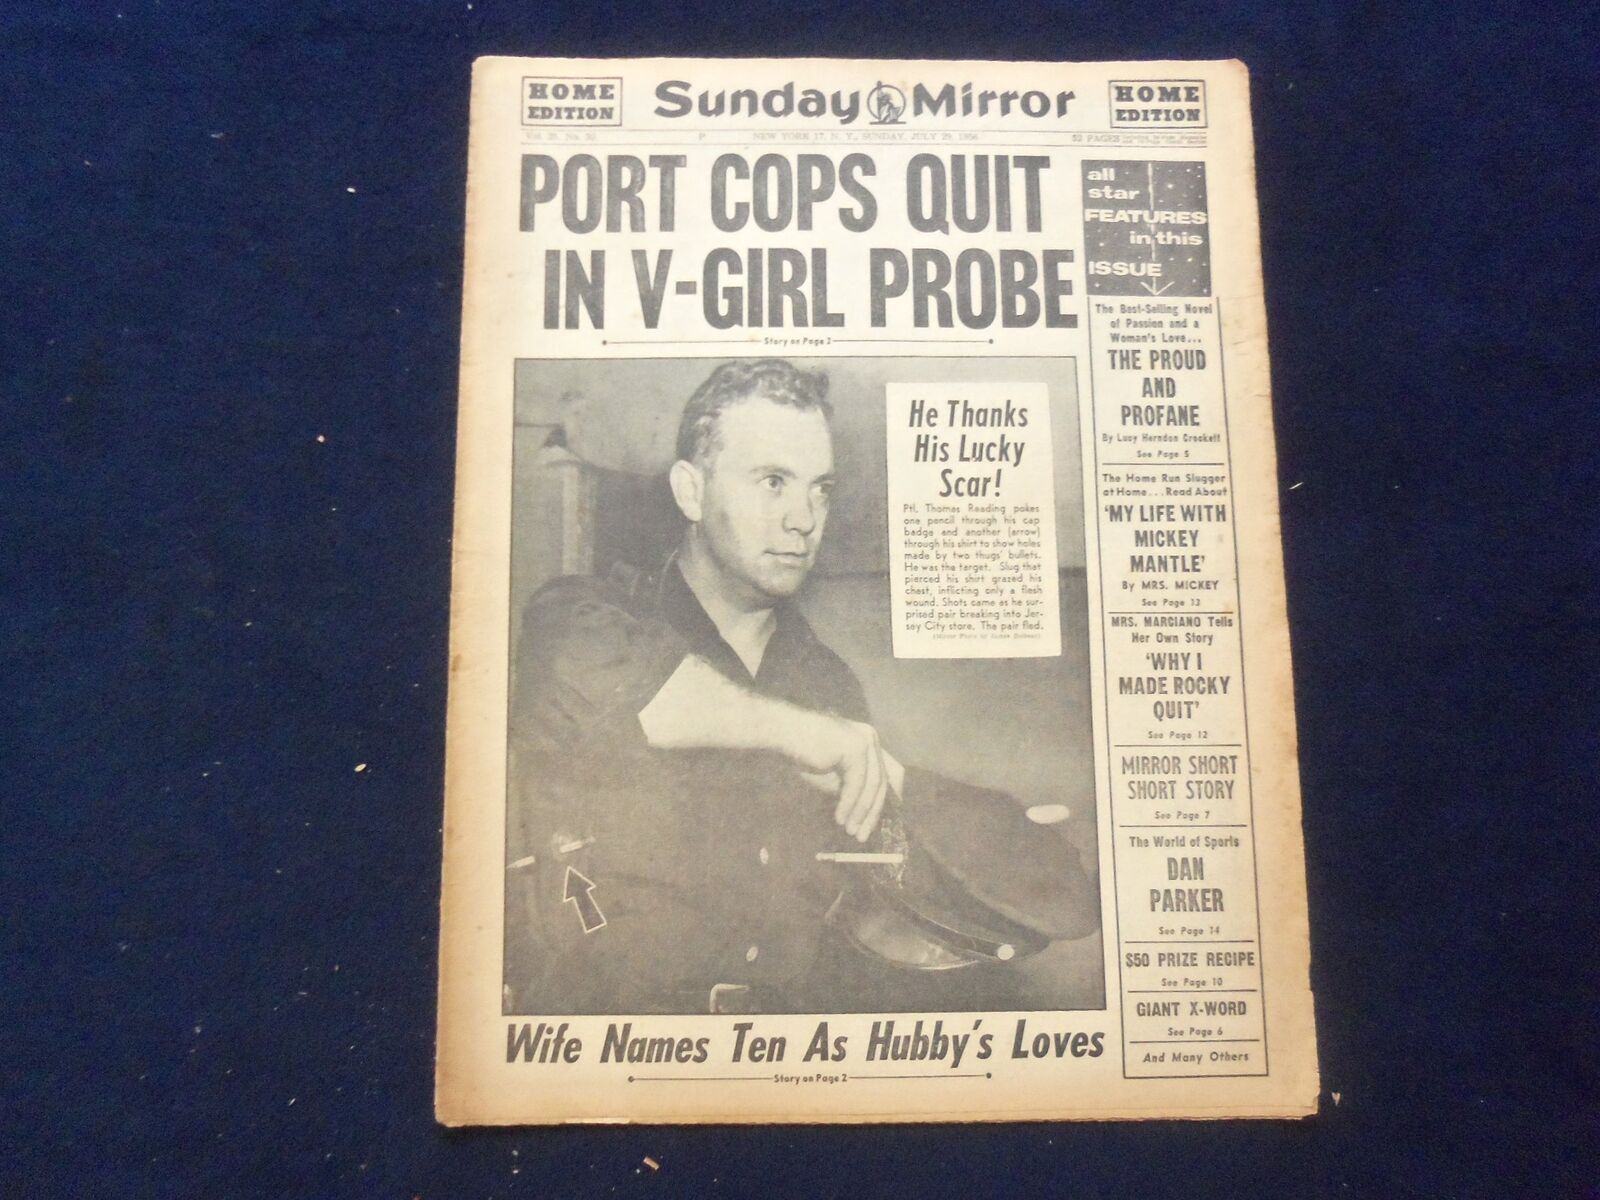 1956 JULY 29 SUNDAY MIRROR NEWSPAPER - PORT COPS QUIT IN V-GIRL PROBE - NP 6740